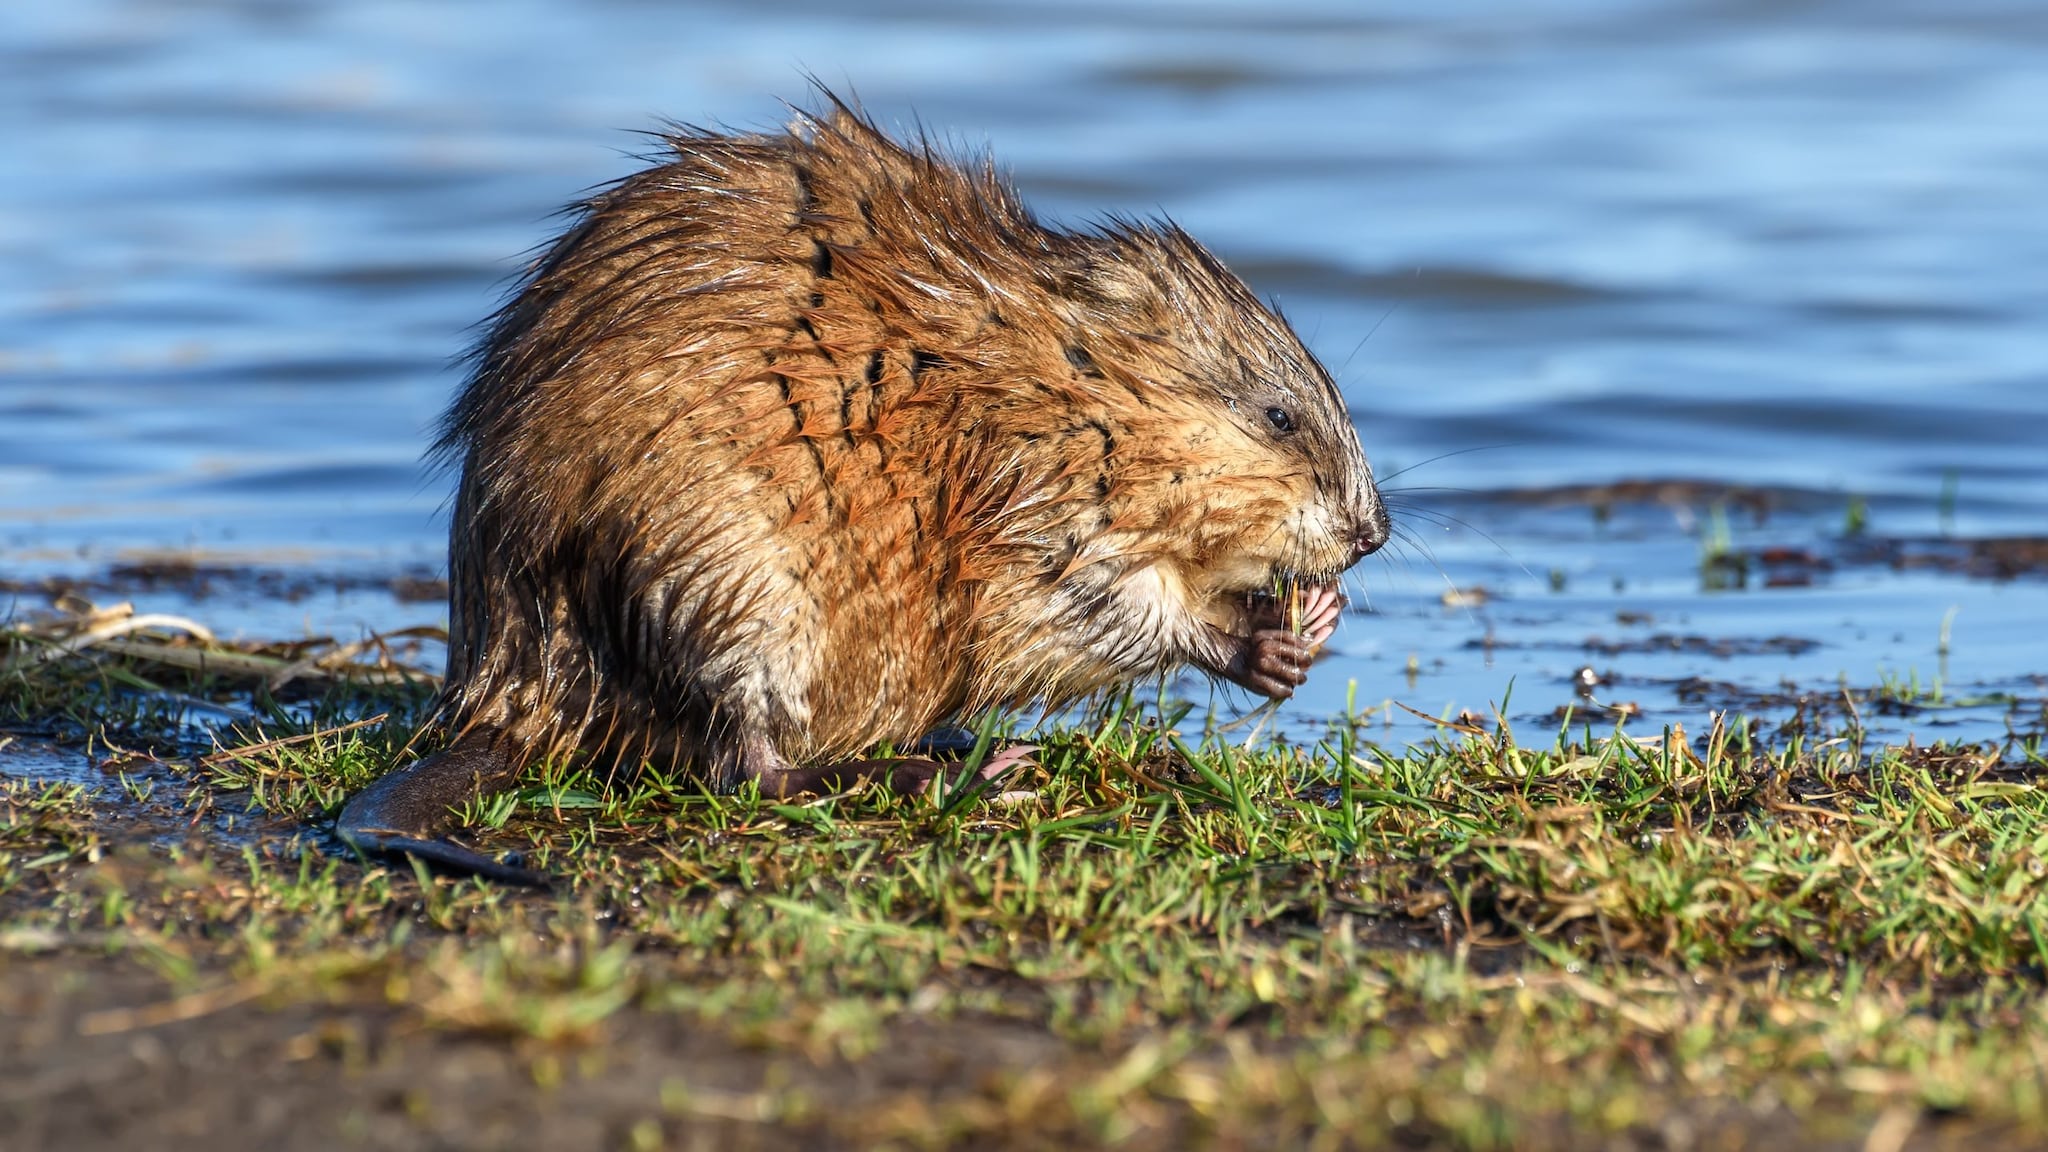 Muskrat eating grass by a river